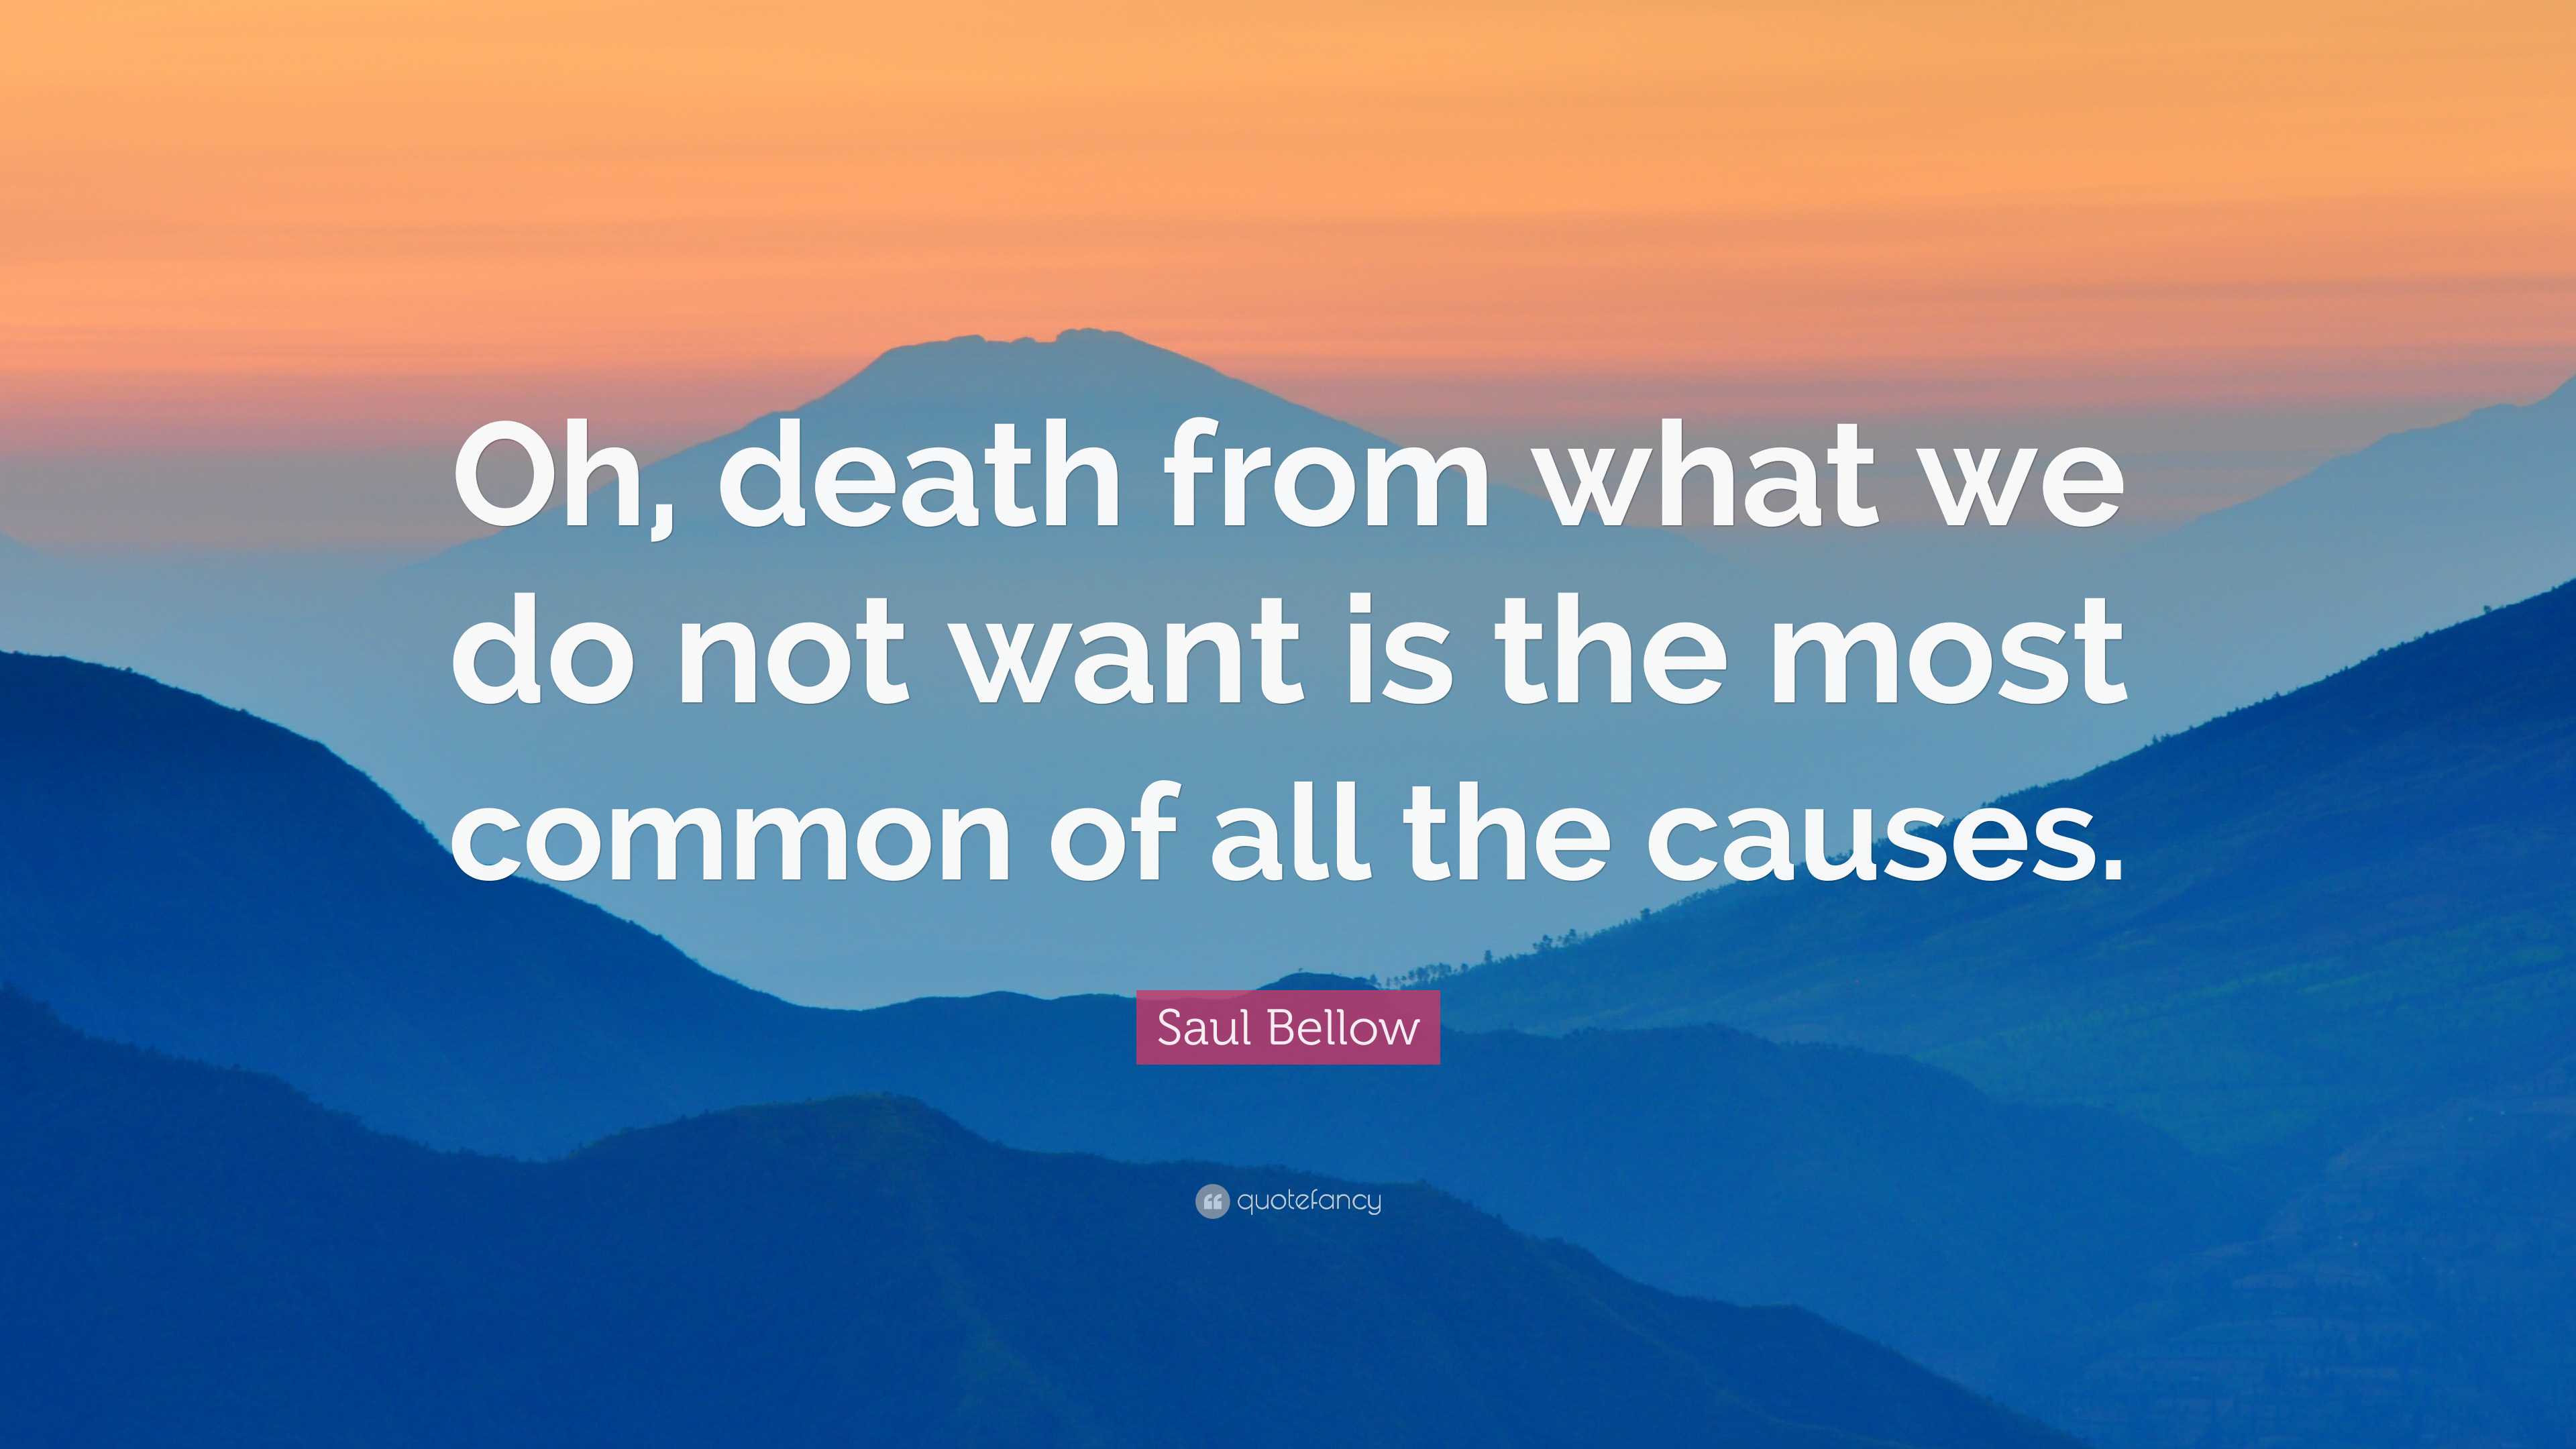 Saul Bellow Quote: “Oh, death from what we do not want is the most ...